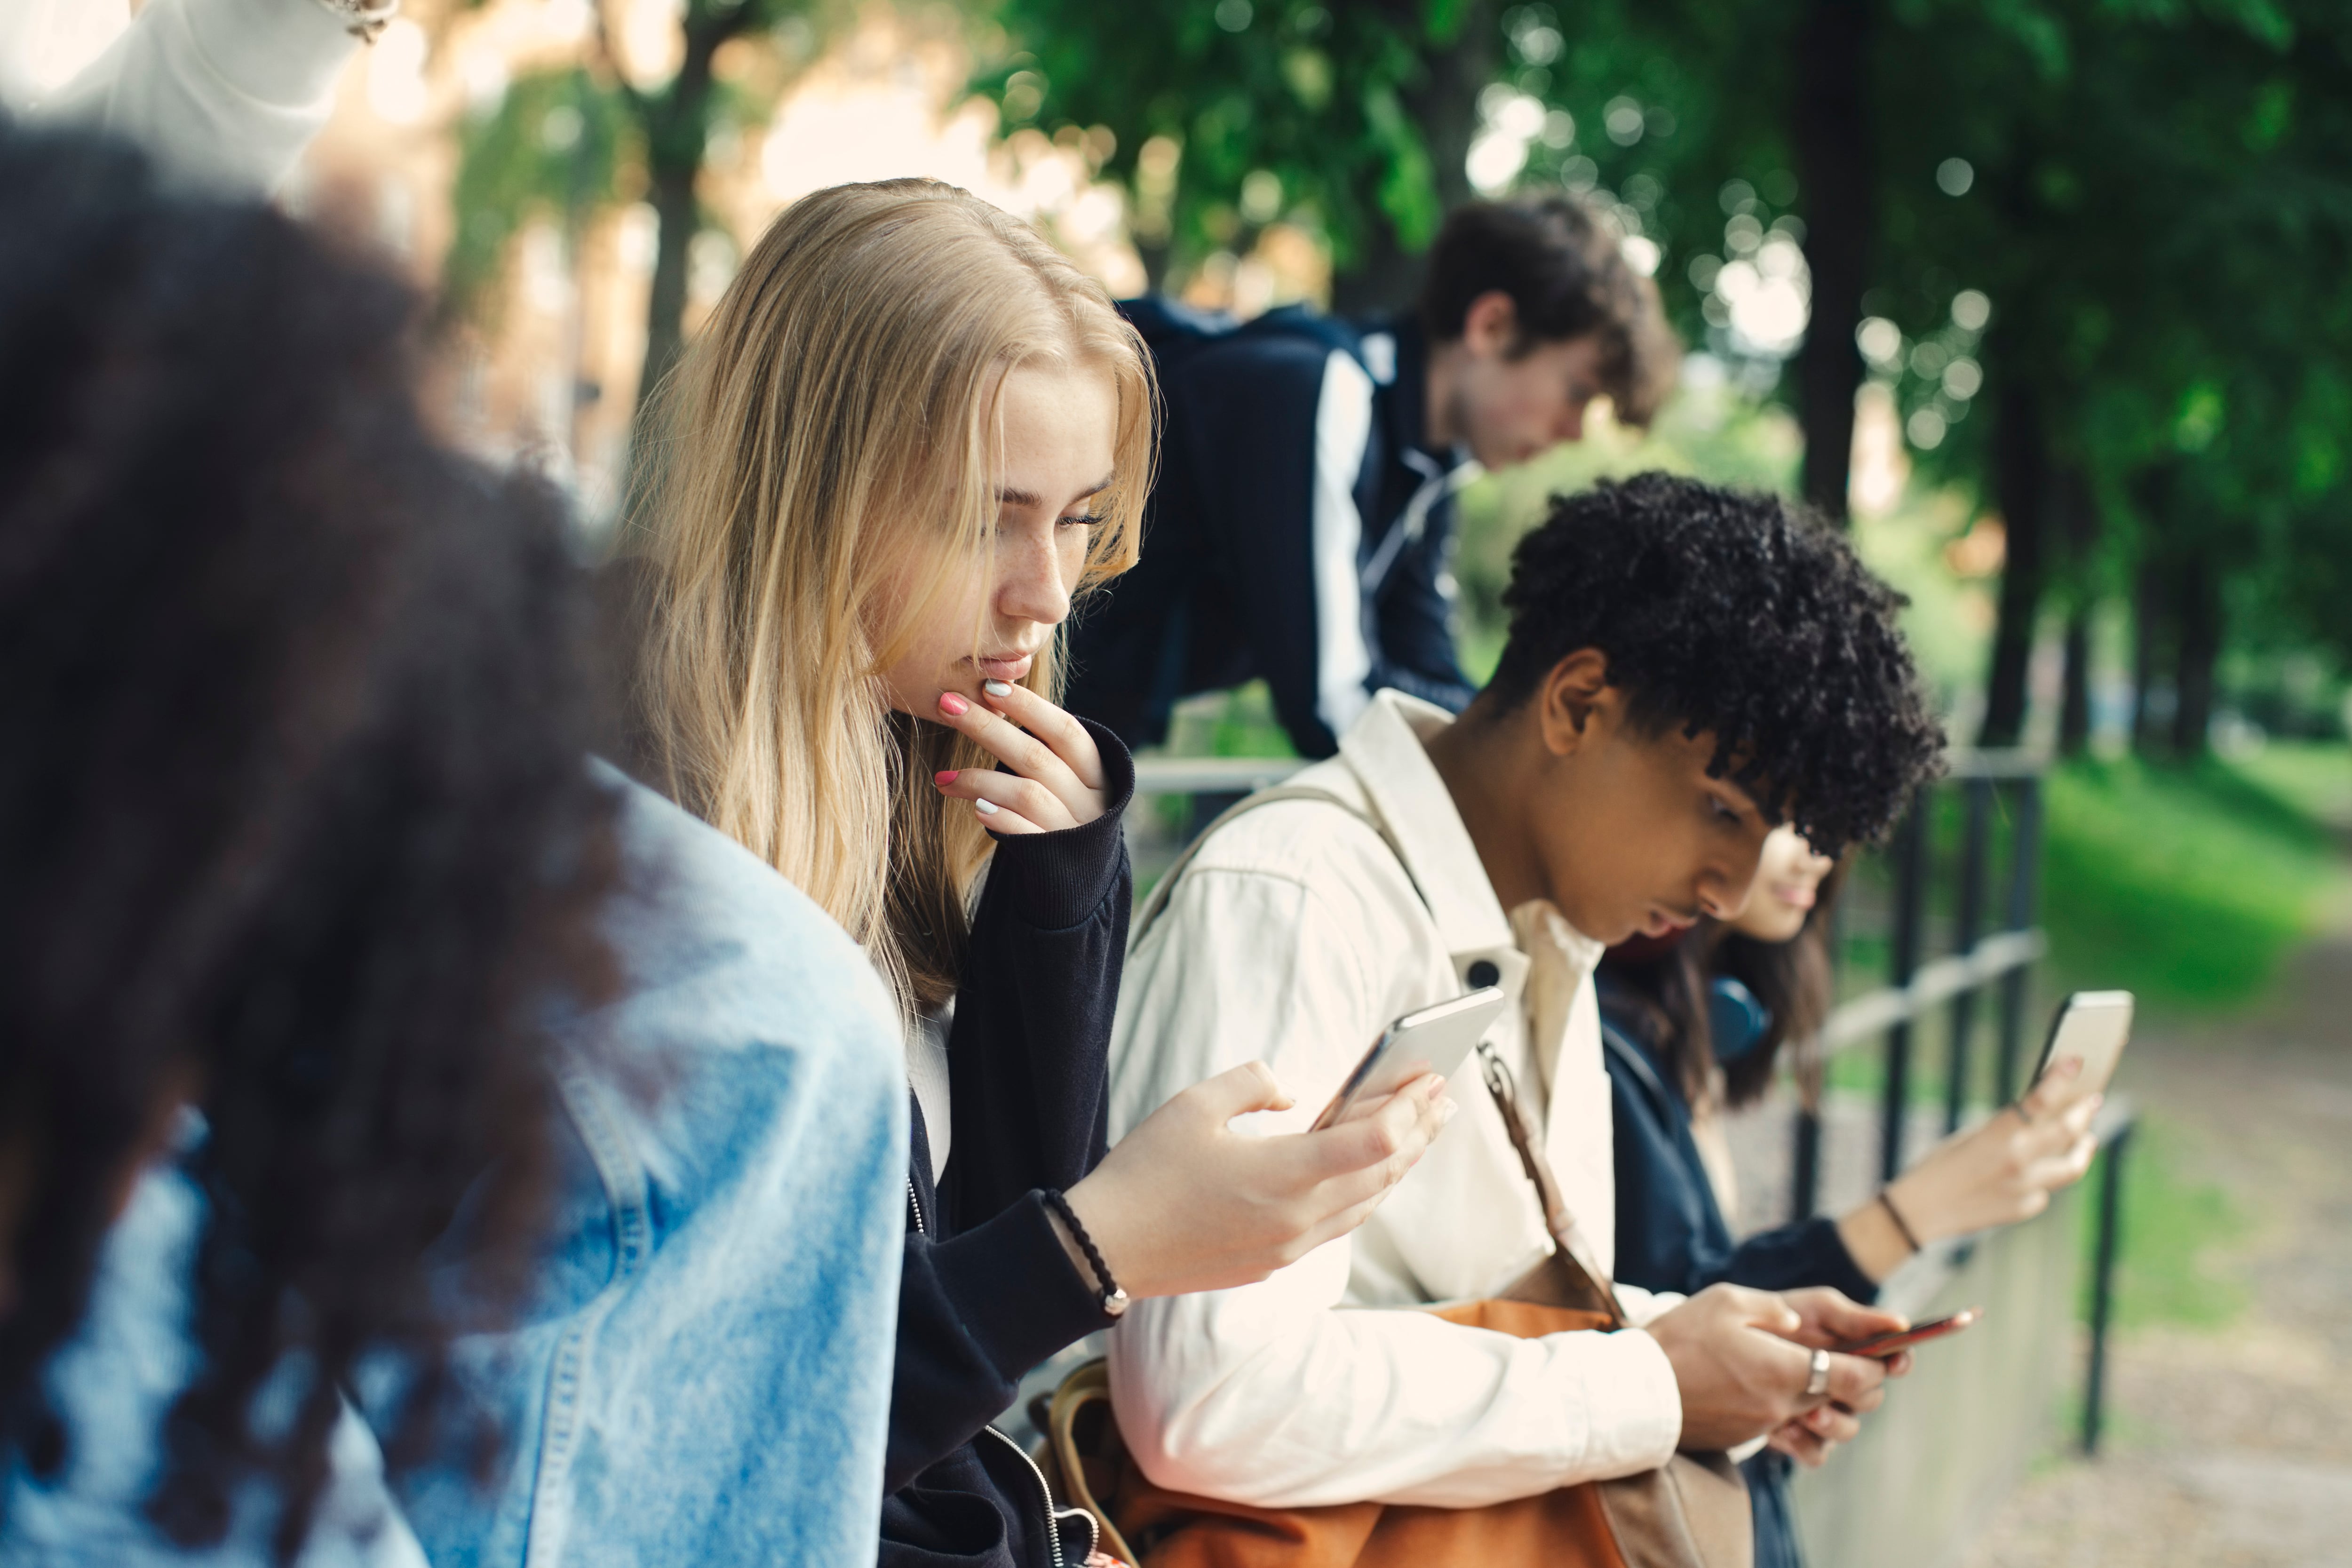 Three students stand outdoors looking down at their phones.